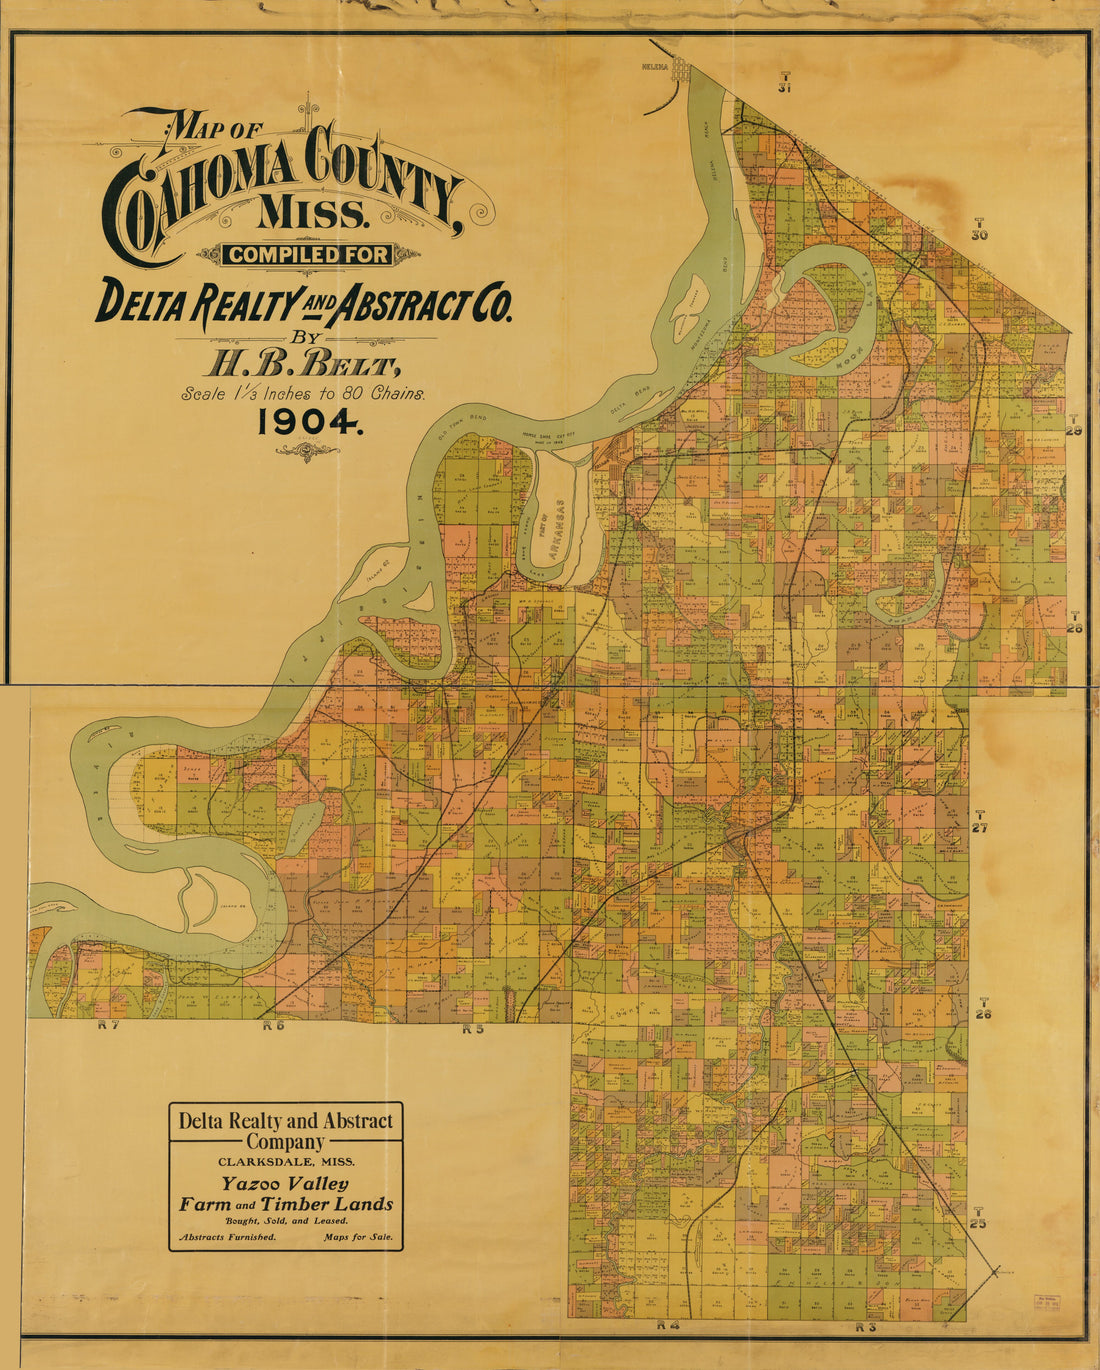 This old map of Map of Coahoma County, Mississippi : Compiled for Delta Realty and Abstract Co from 1904 was created by H. B. Belt in 1904